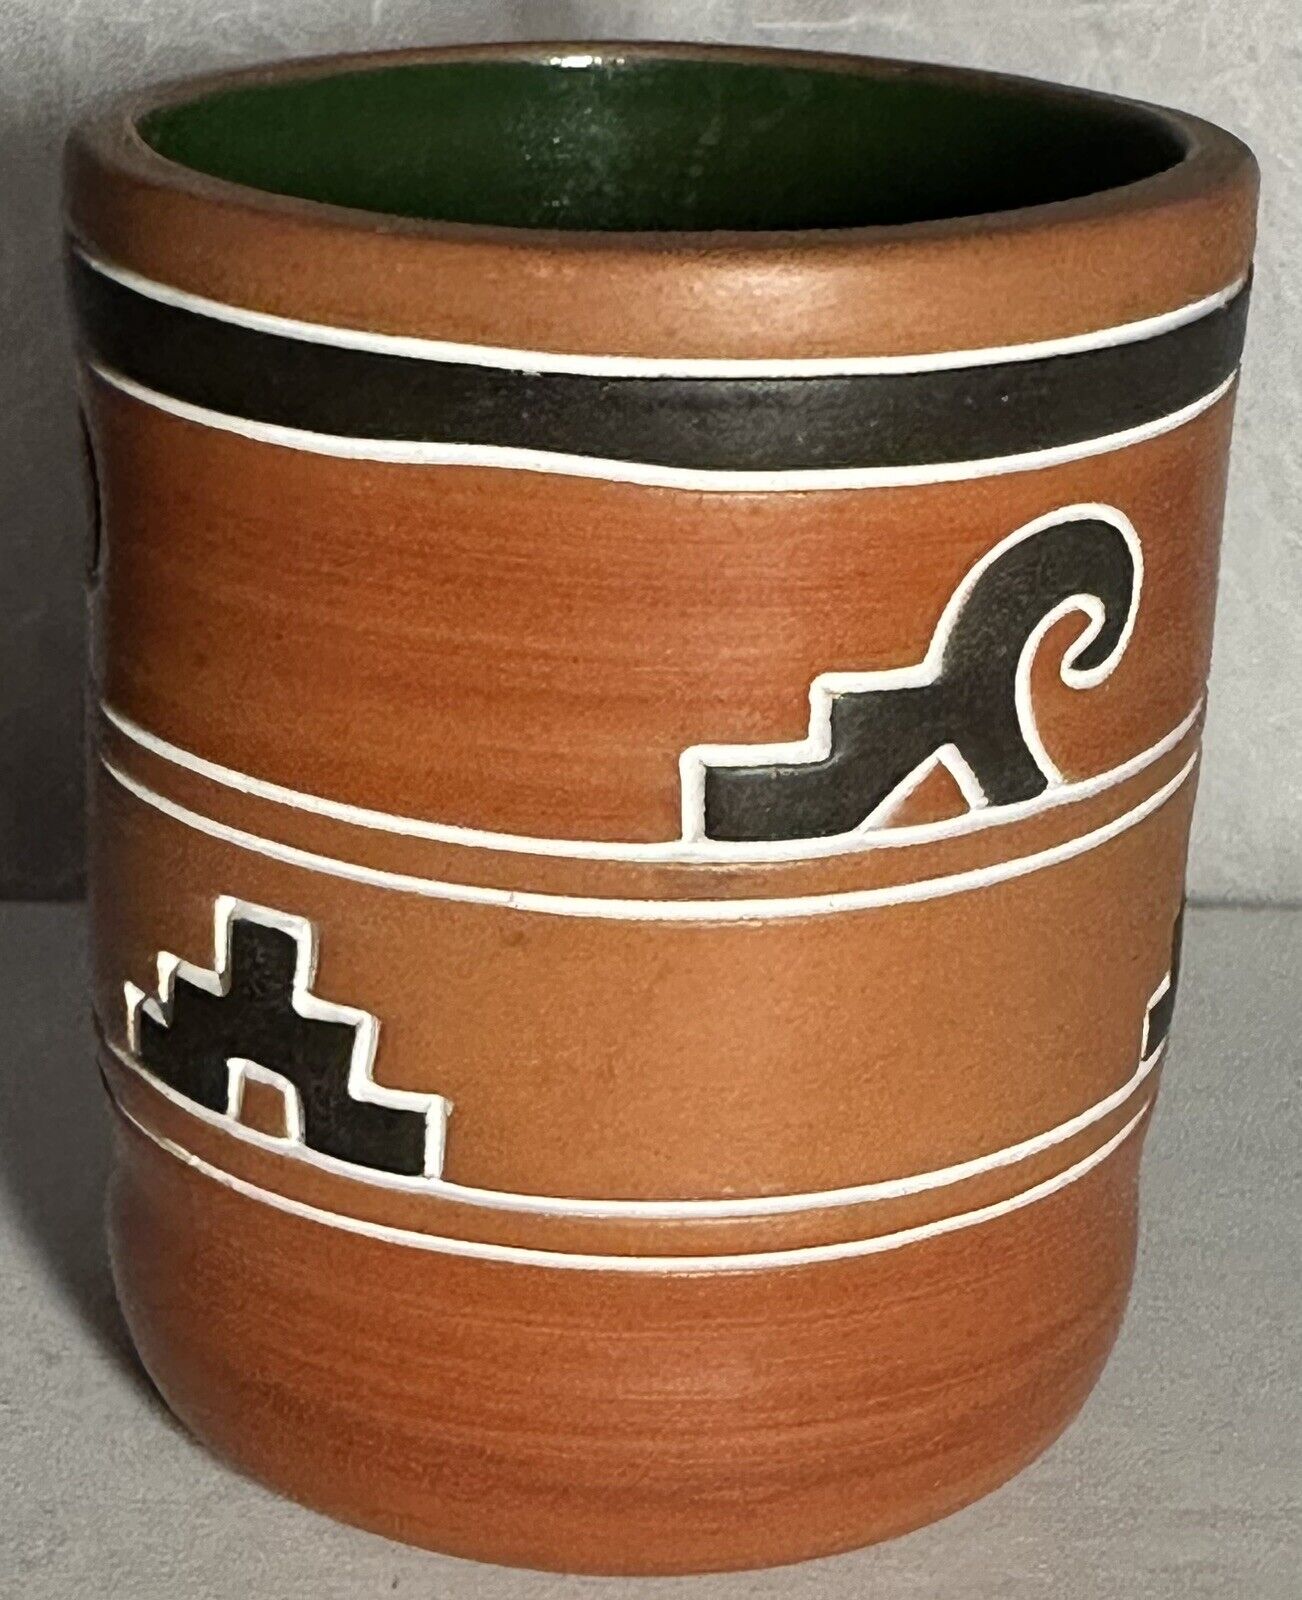 Vintage Mexican Hand Crafted Pottery Small Pot Planter Vase Made in Mexico